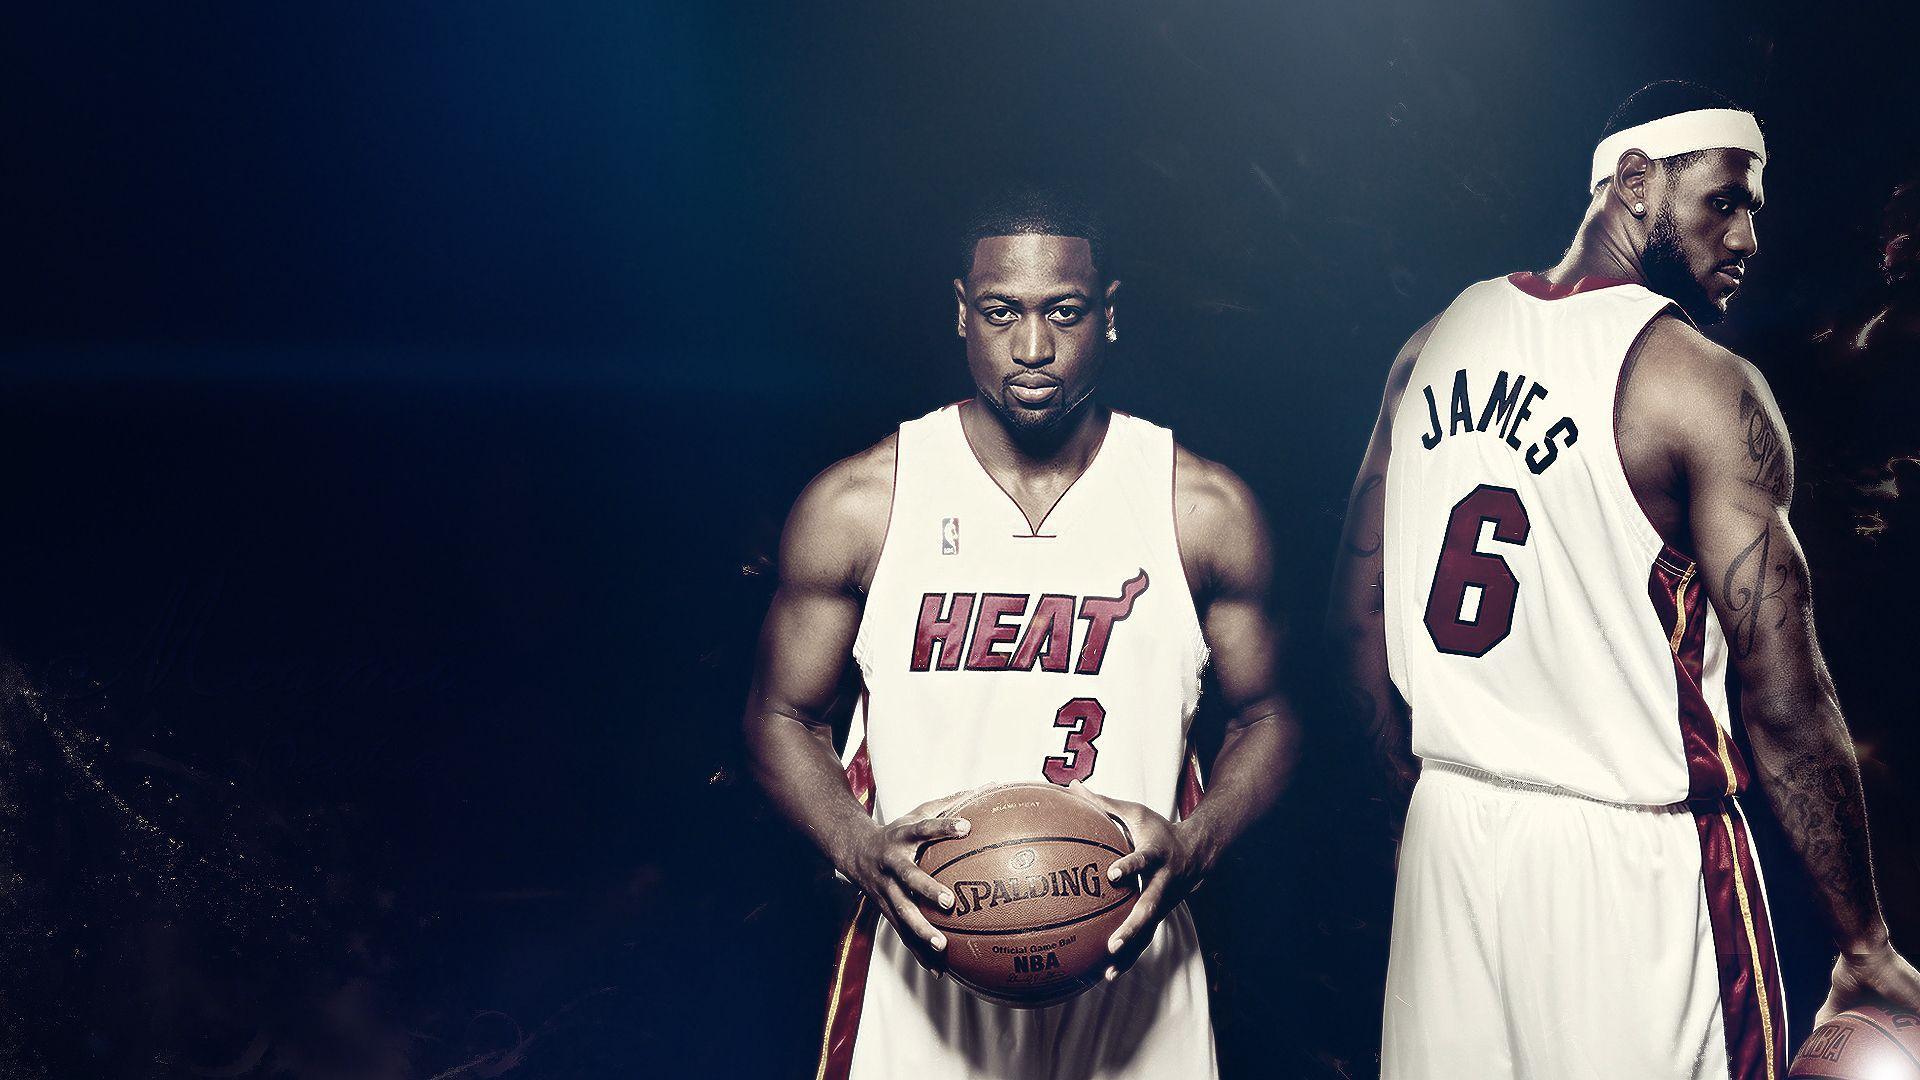 Two basketball players wallpaper and image